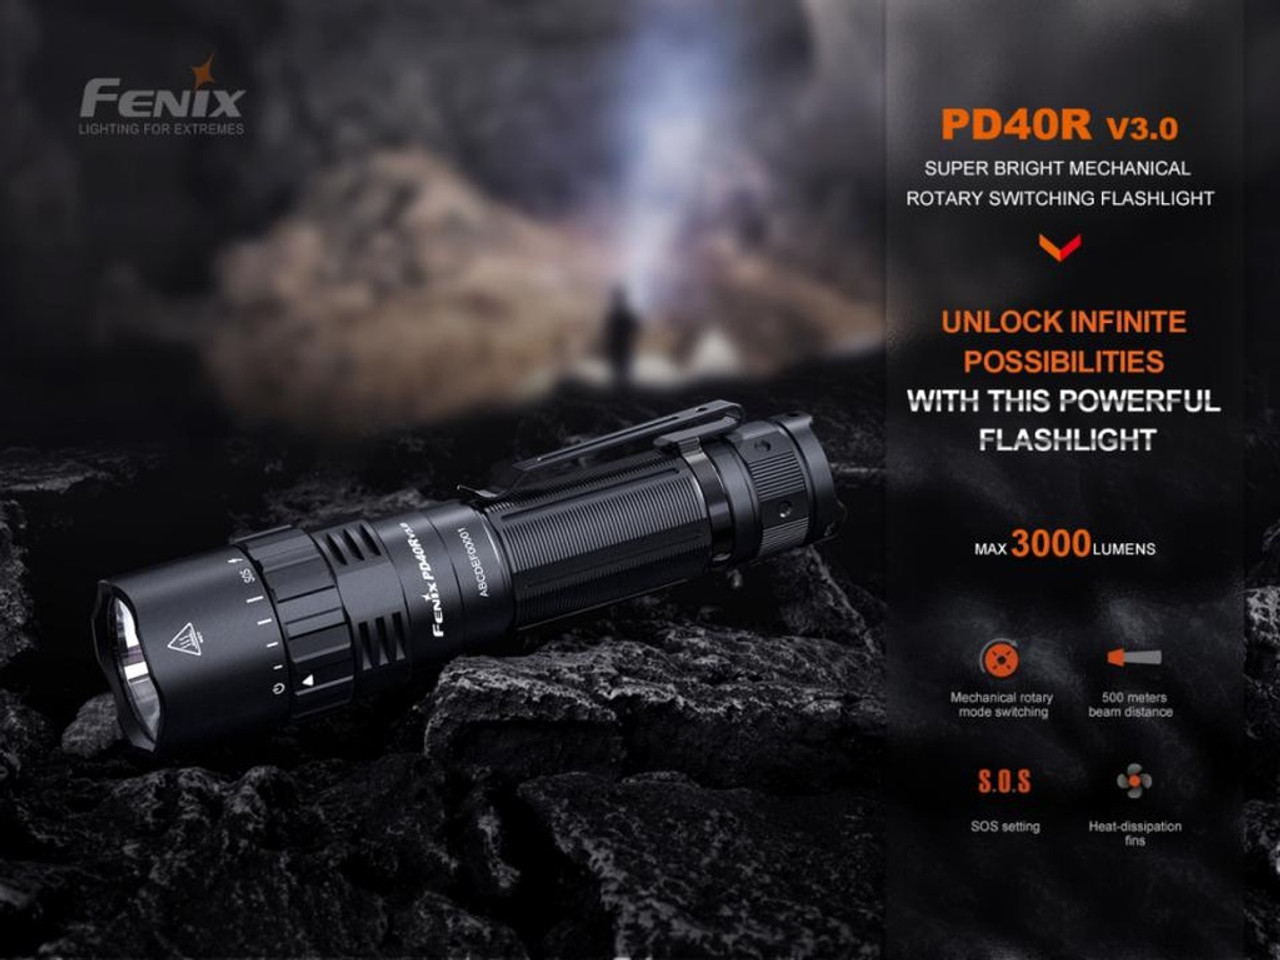 Fenix PD40R V3.0 Rechargeable Mechanical Rotary Switching Flashlight